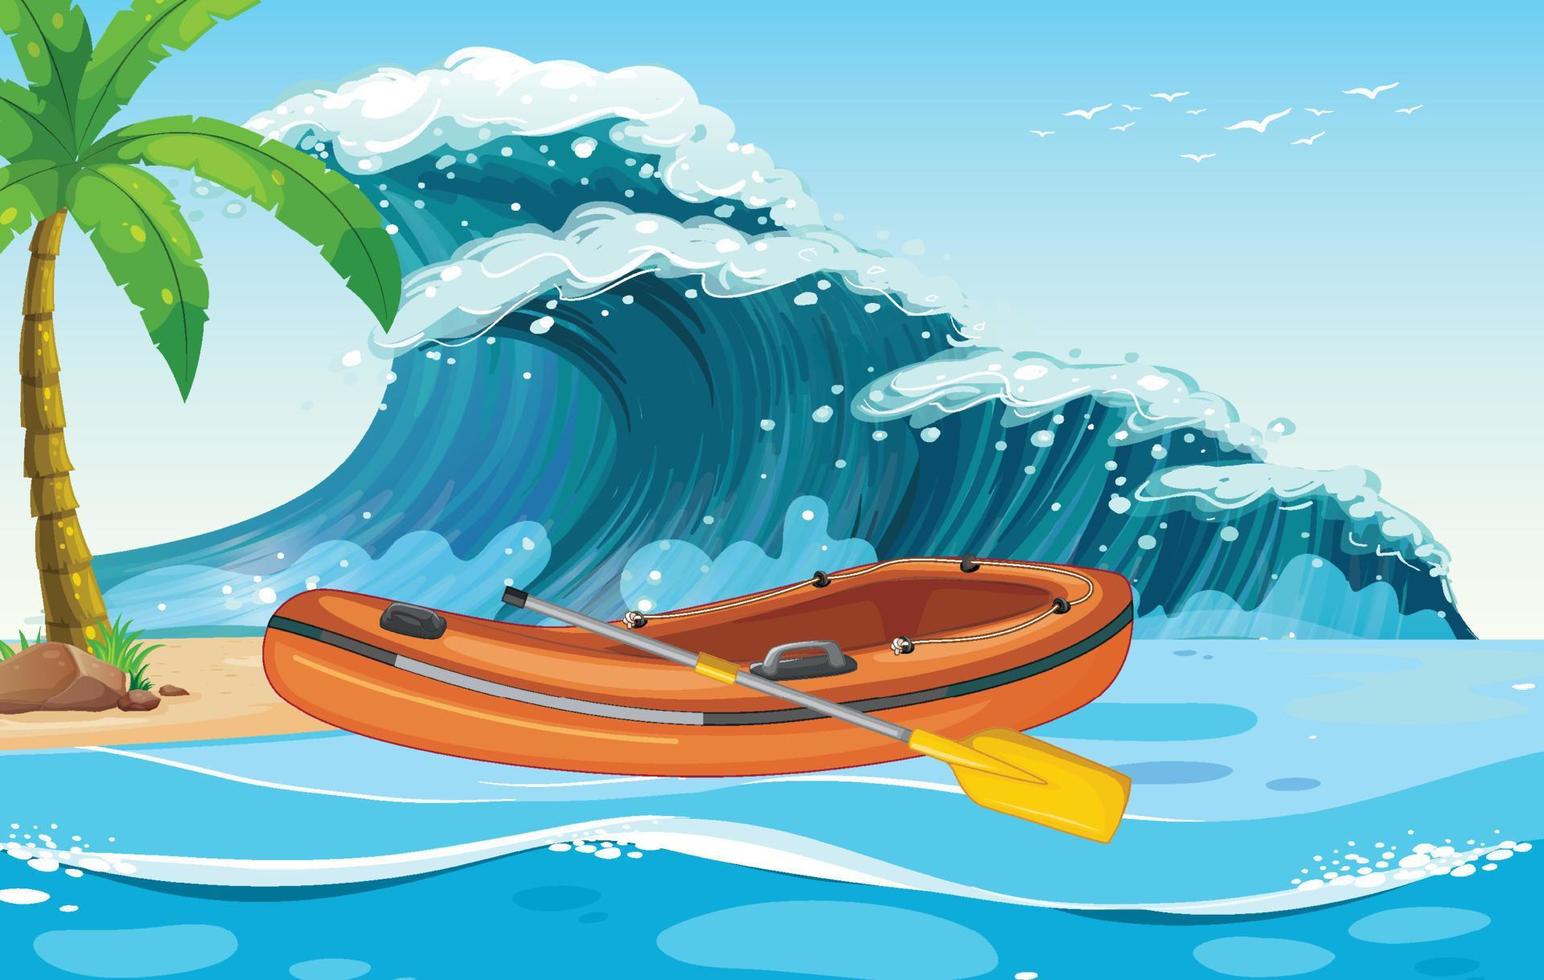 Beach scene with inflatable boat on sea wave vector